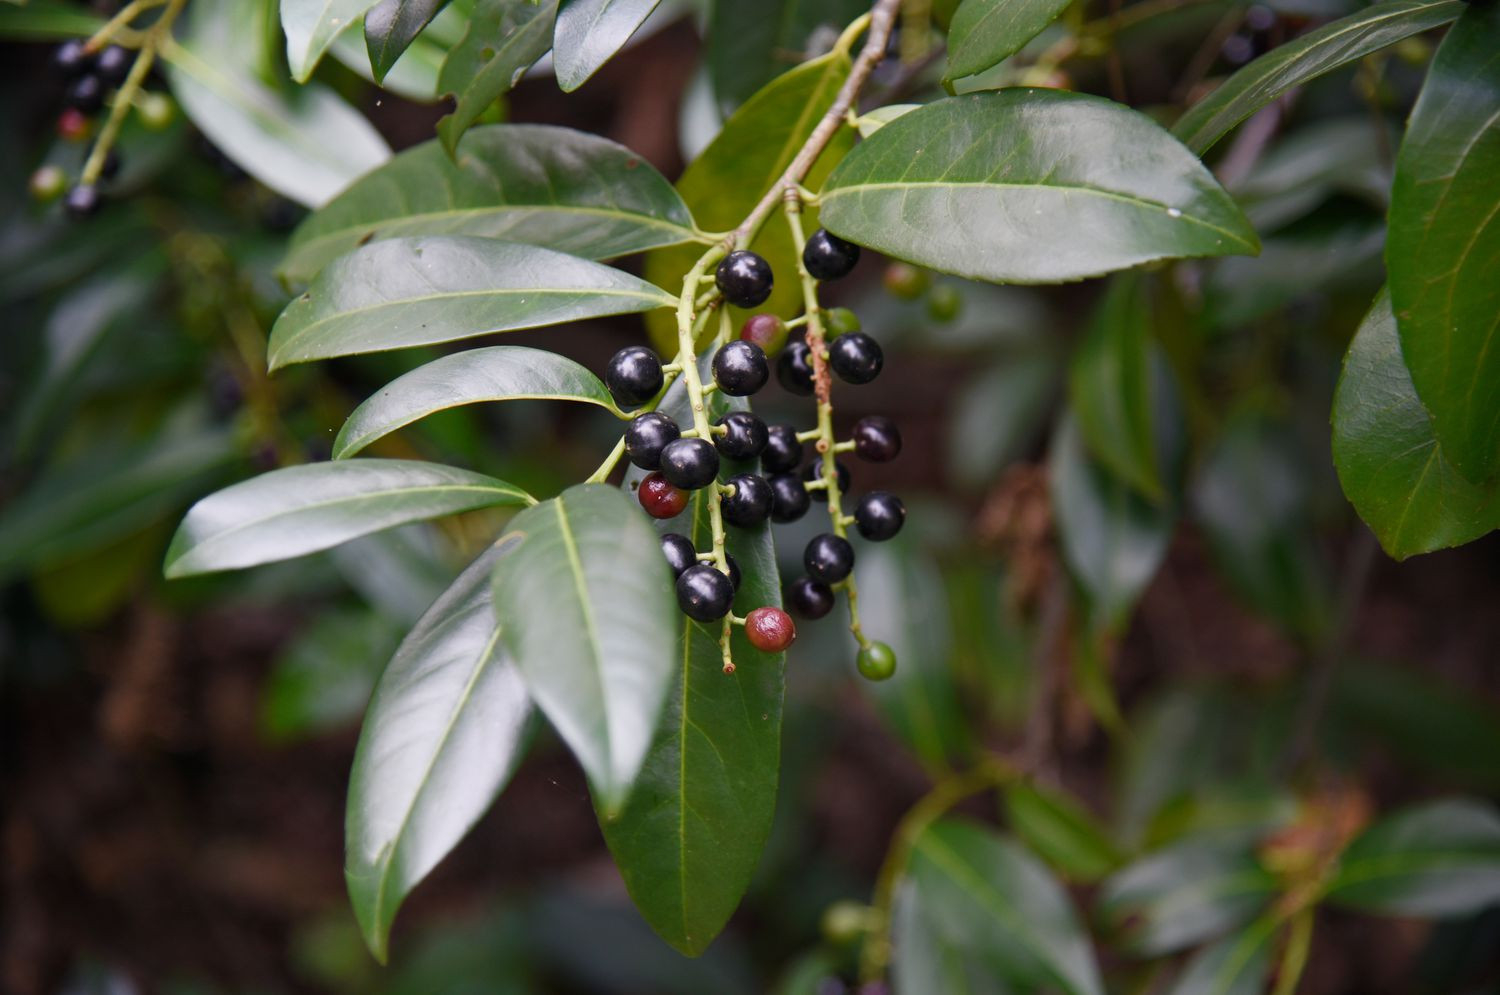 How To Grow And Care For Cherry Laurel